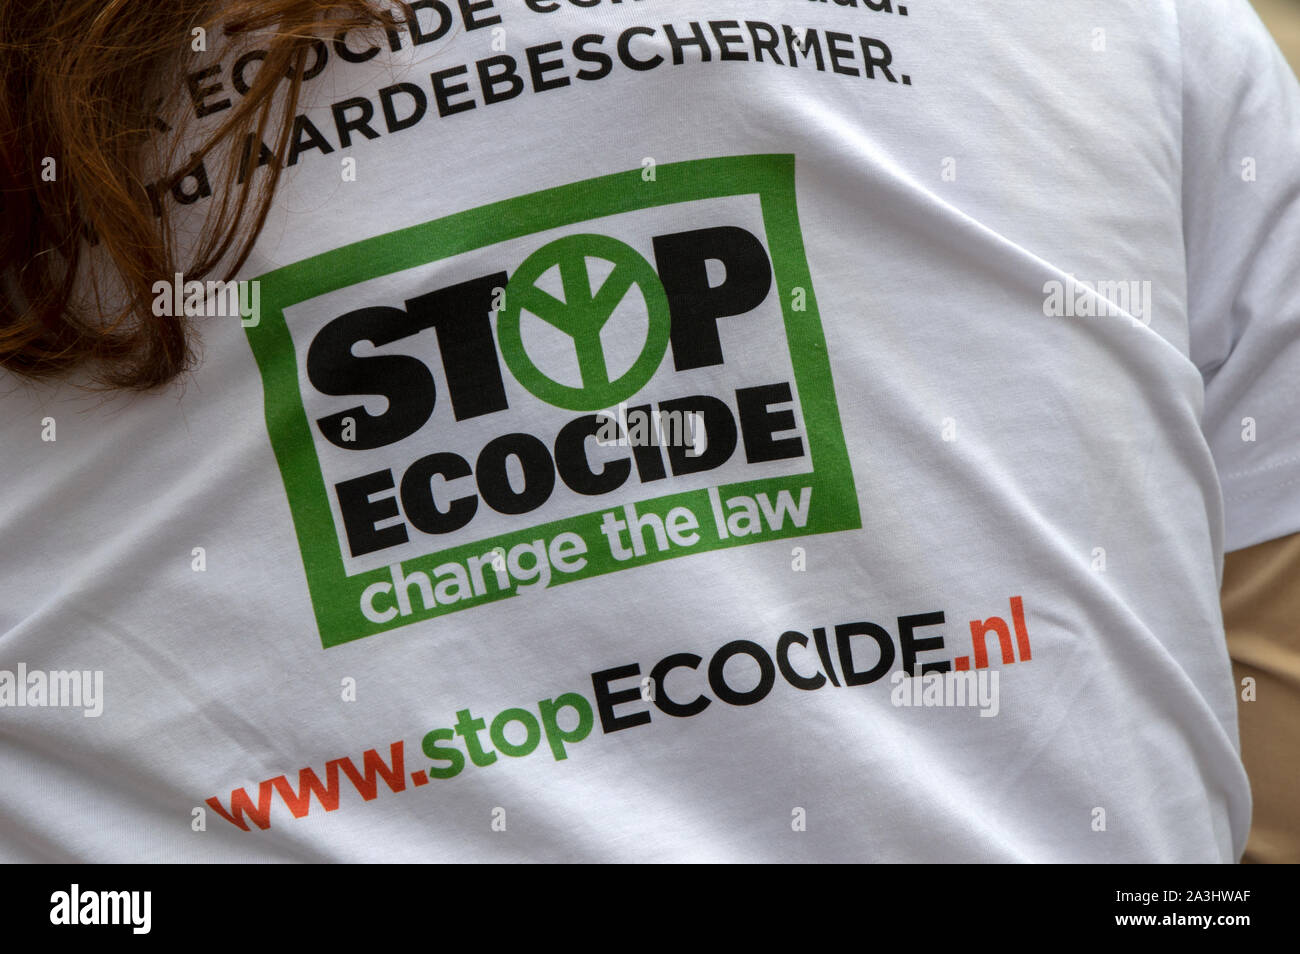 Day 1 Stop Ecocide T-Shirt At The Climate Demonstration From The Extinction Rebellion Group At Amsterdam The Netherlands 2019 Stock Photo